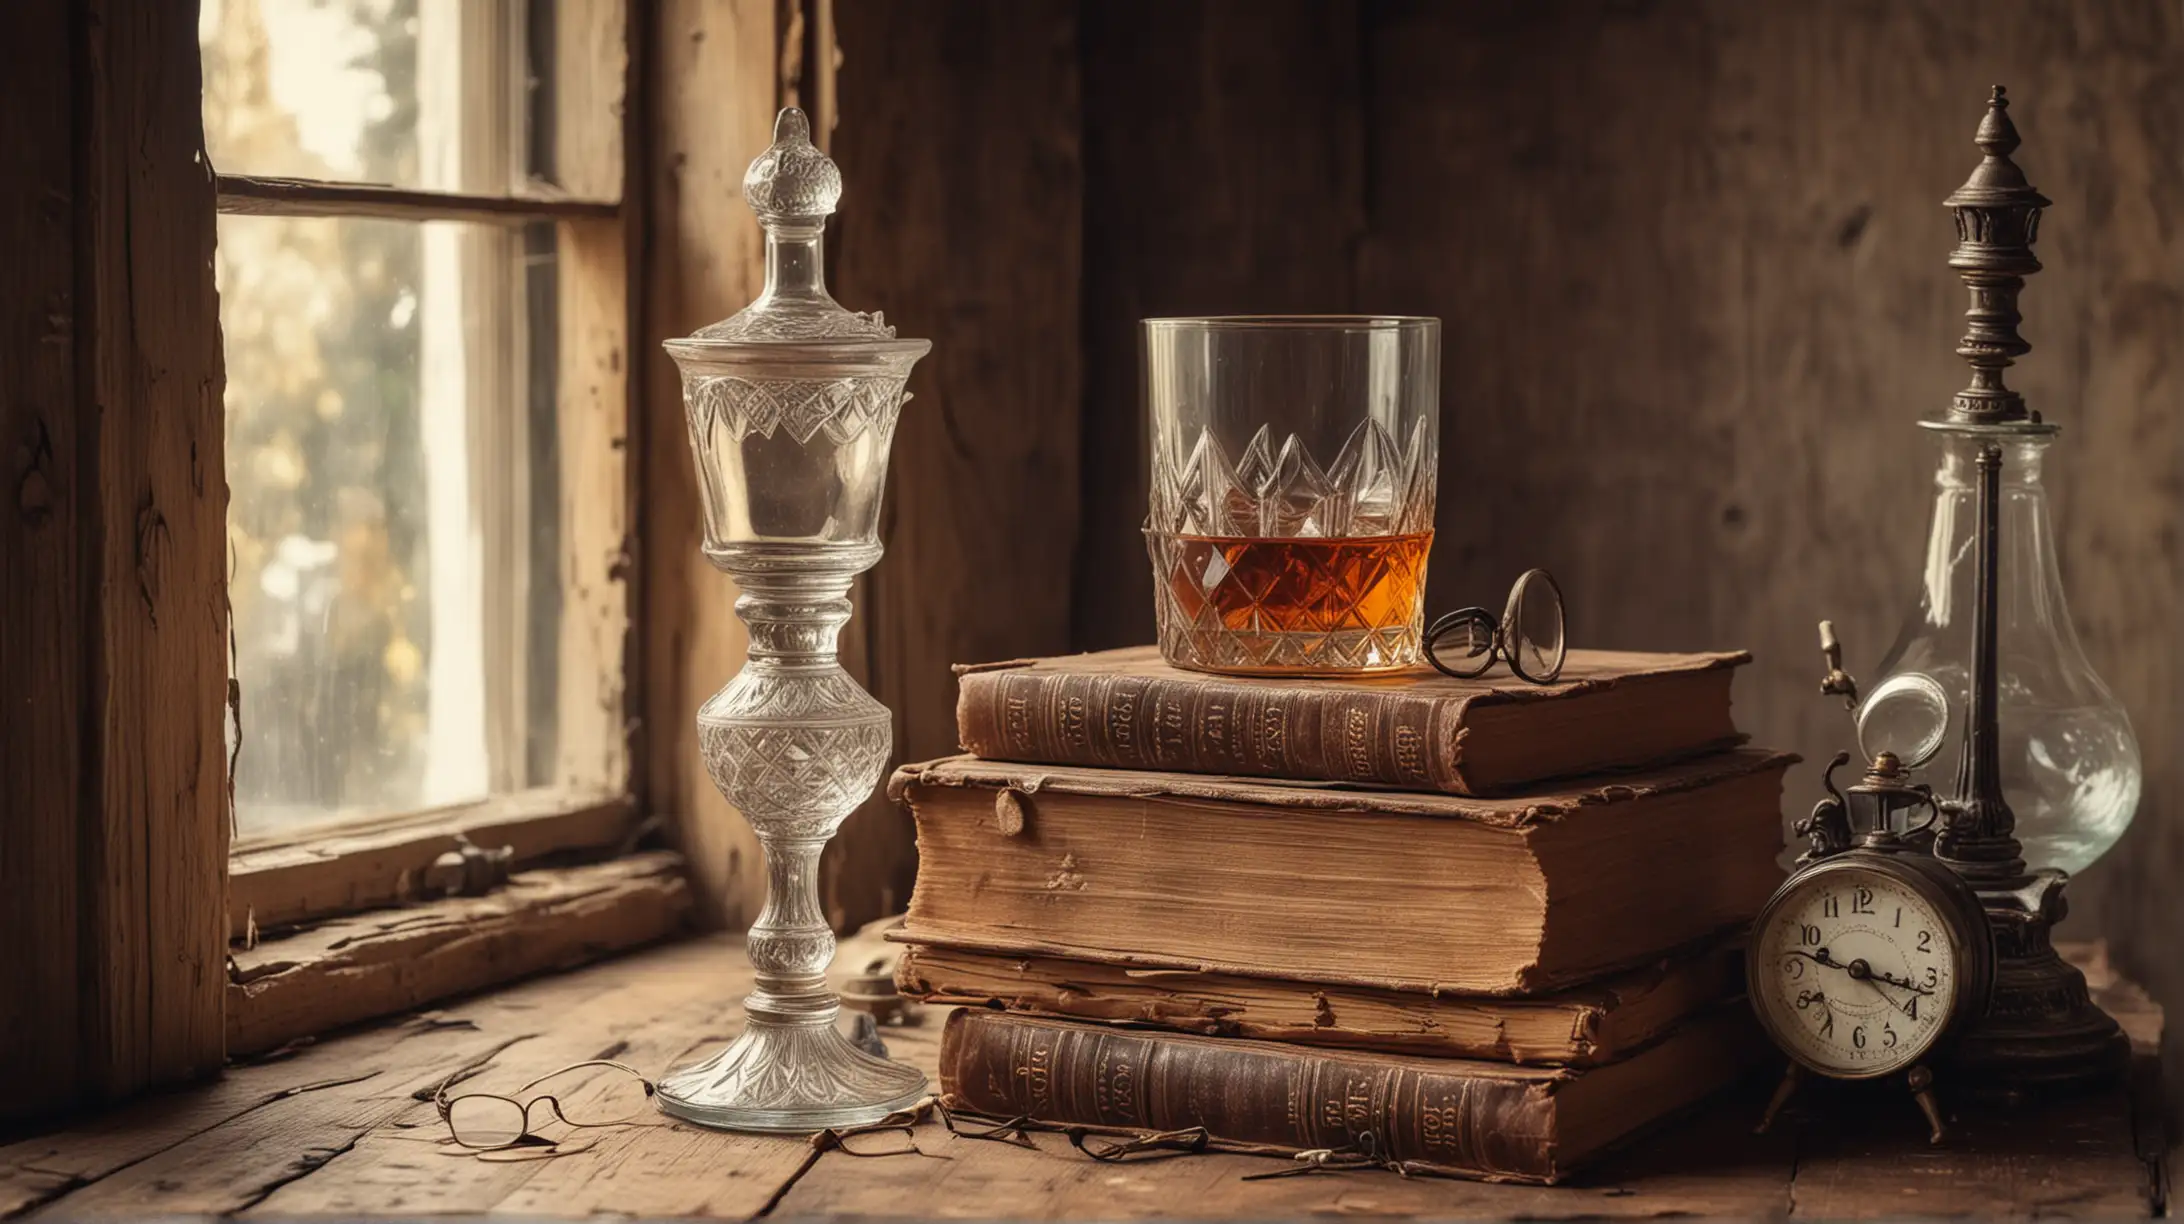 Vintage Book Collection with Antique Glasses and Brandy in 19th Century Study